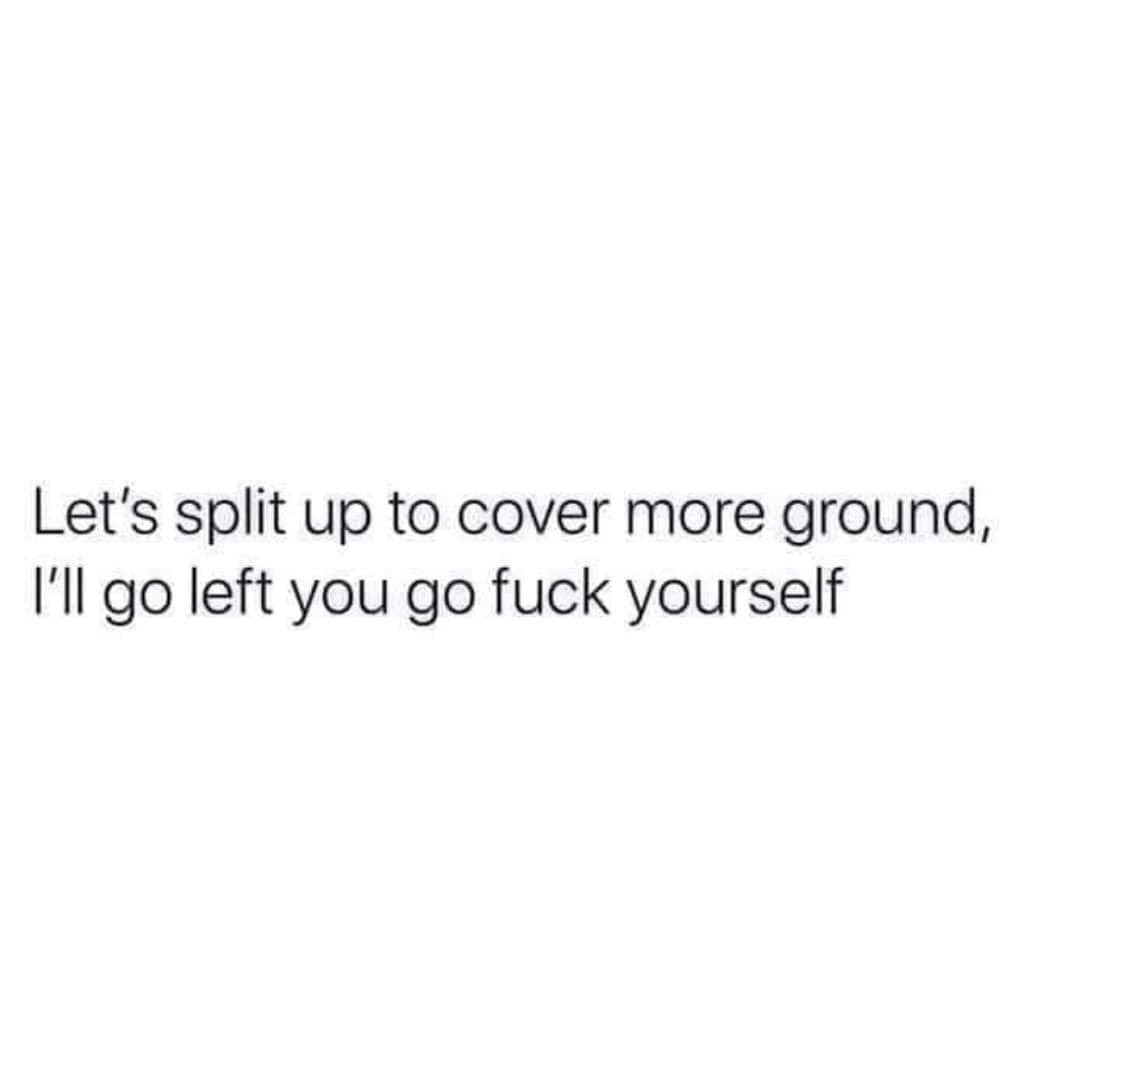 quotes on little flowers - Let's split up to cover more ground, I'll go left you go fuck yourself